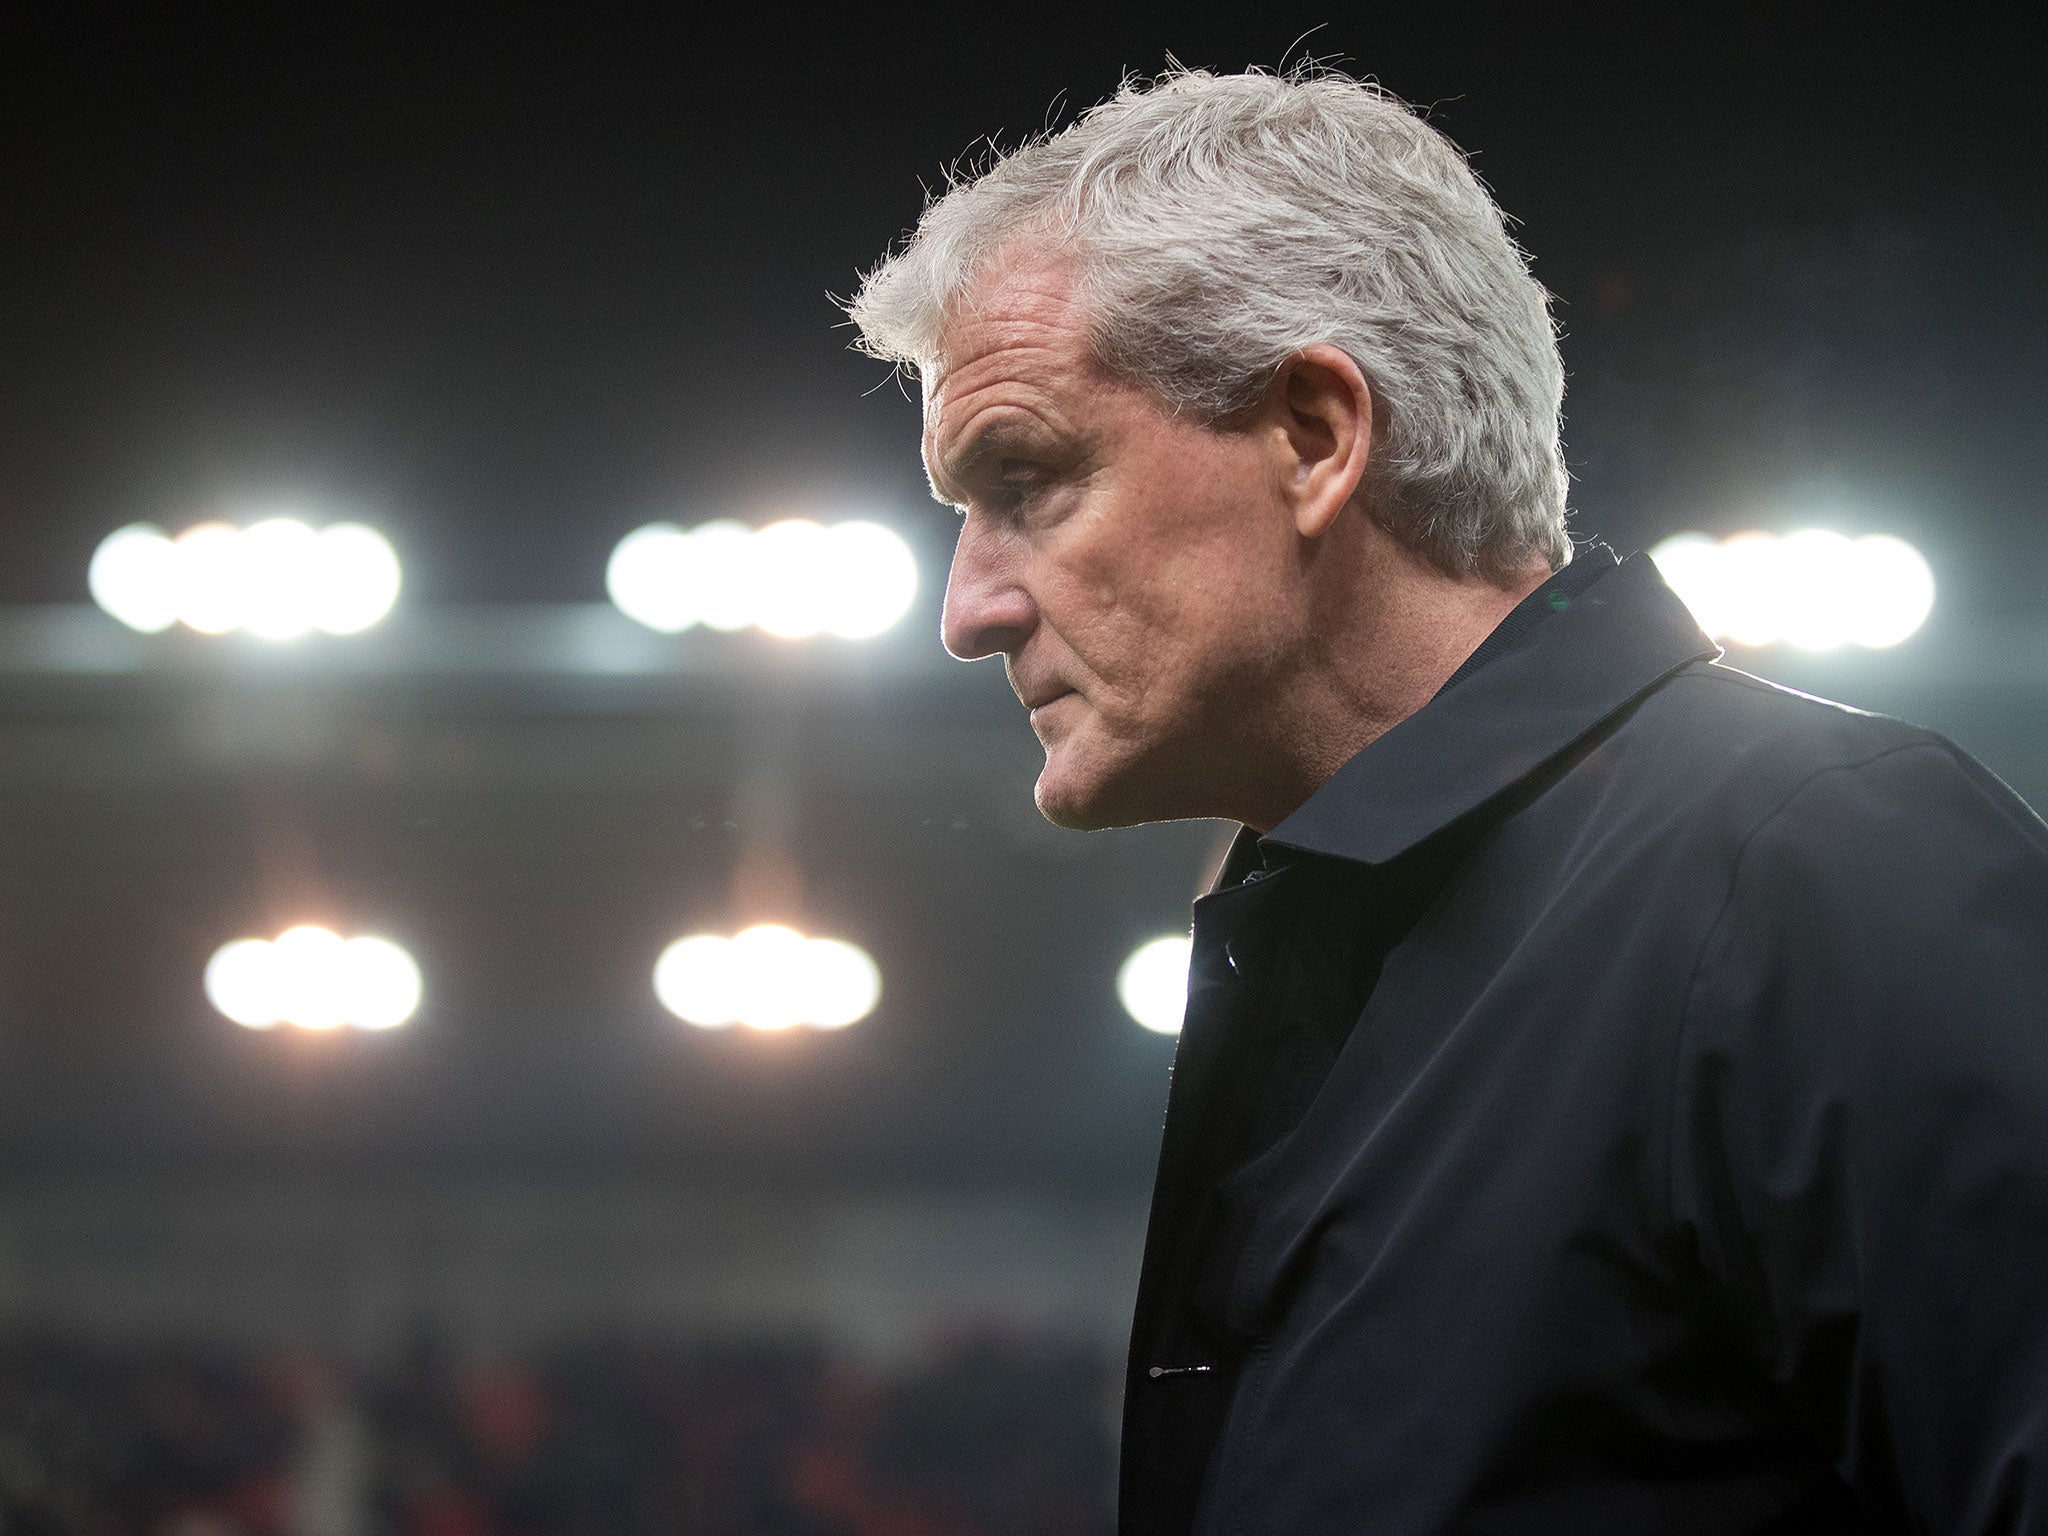 Mark Hughes says his job is not under threat at Stoke